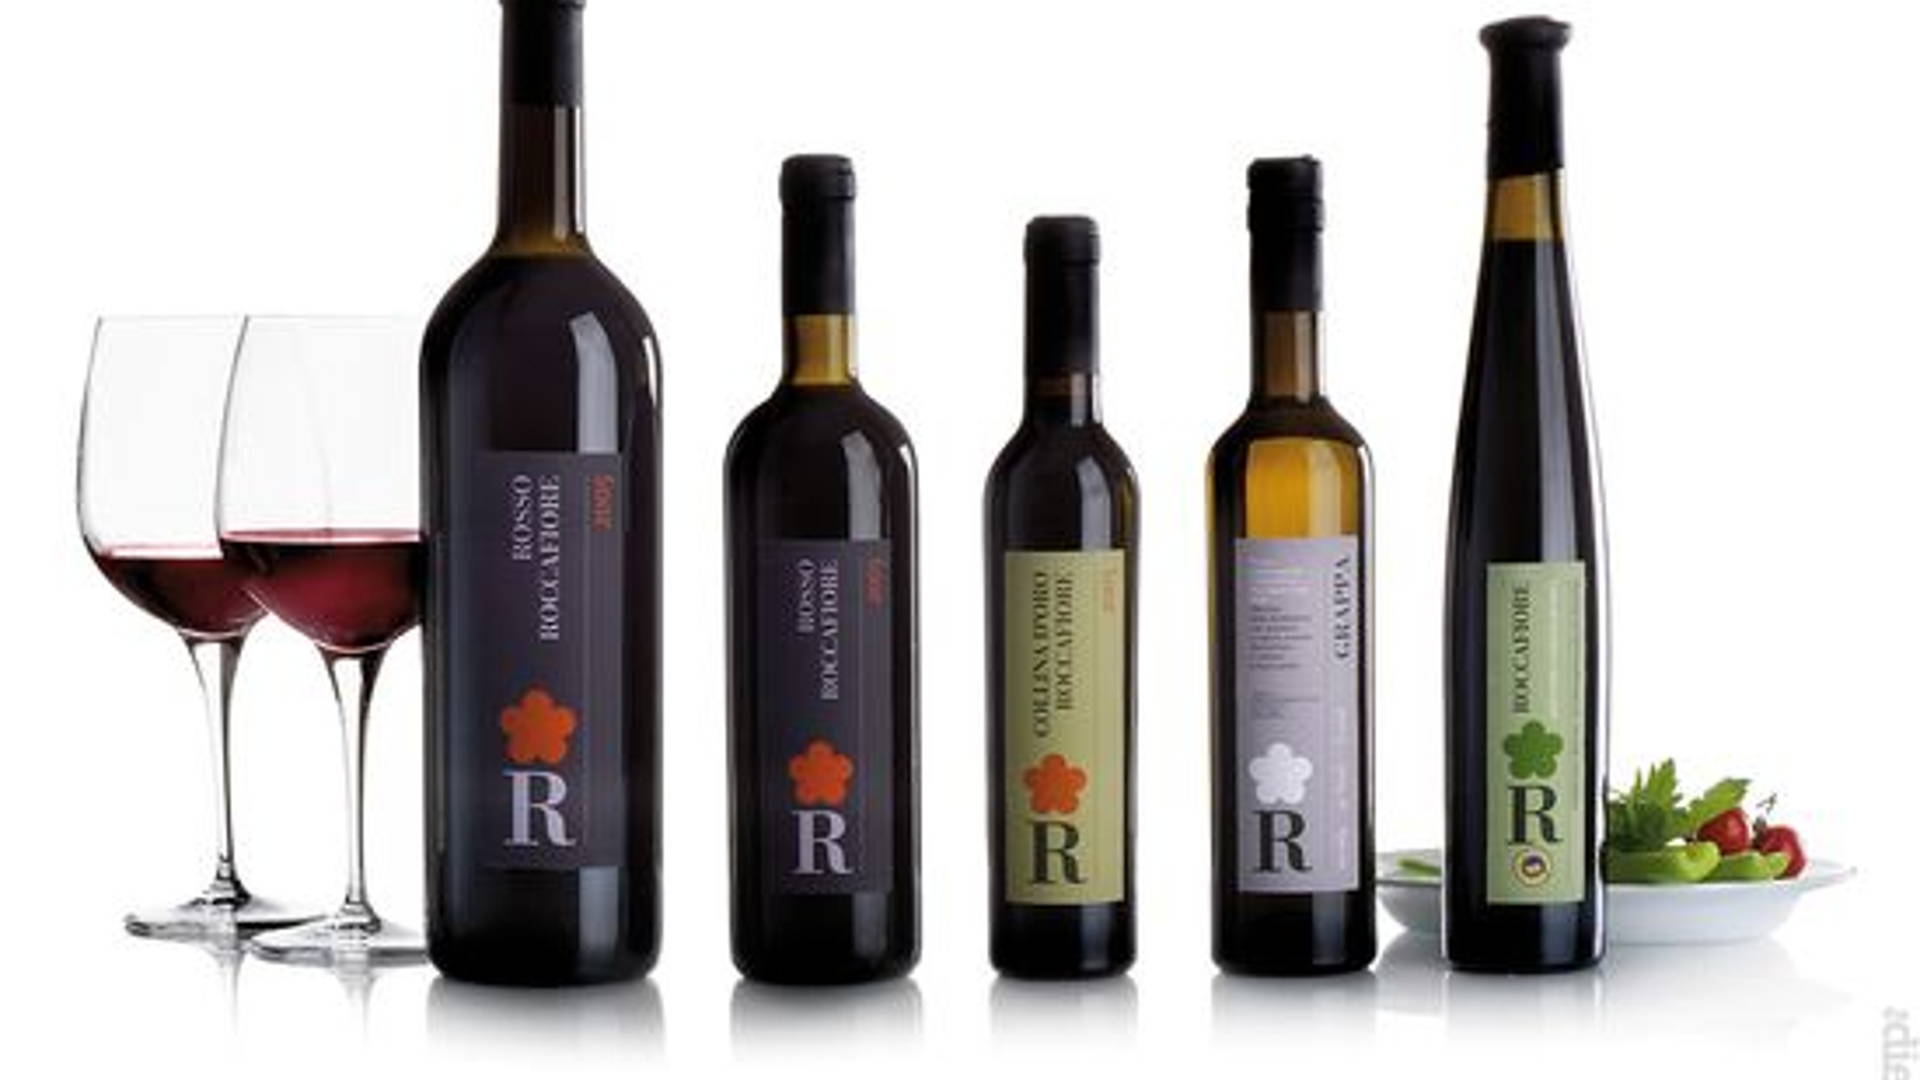 Featured image for Roccafiore Wines